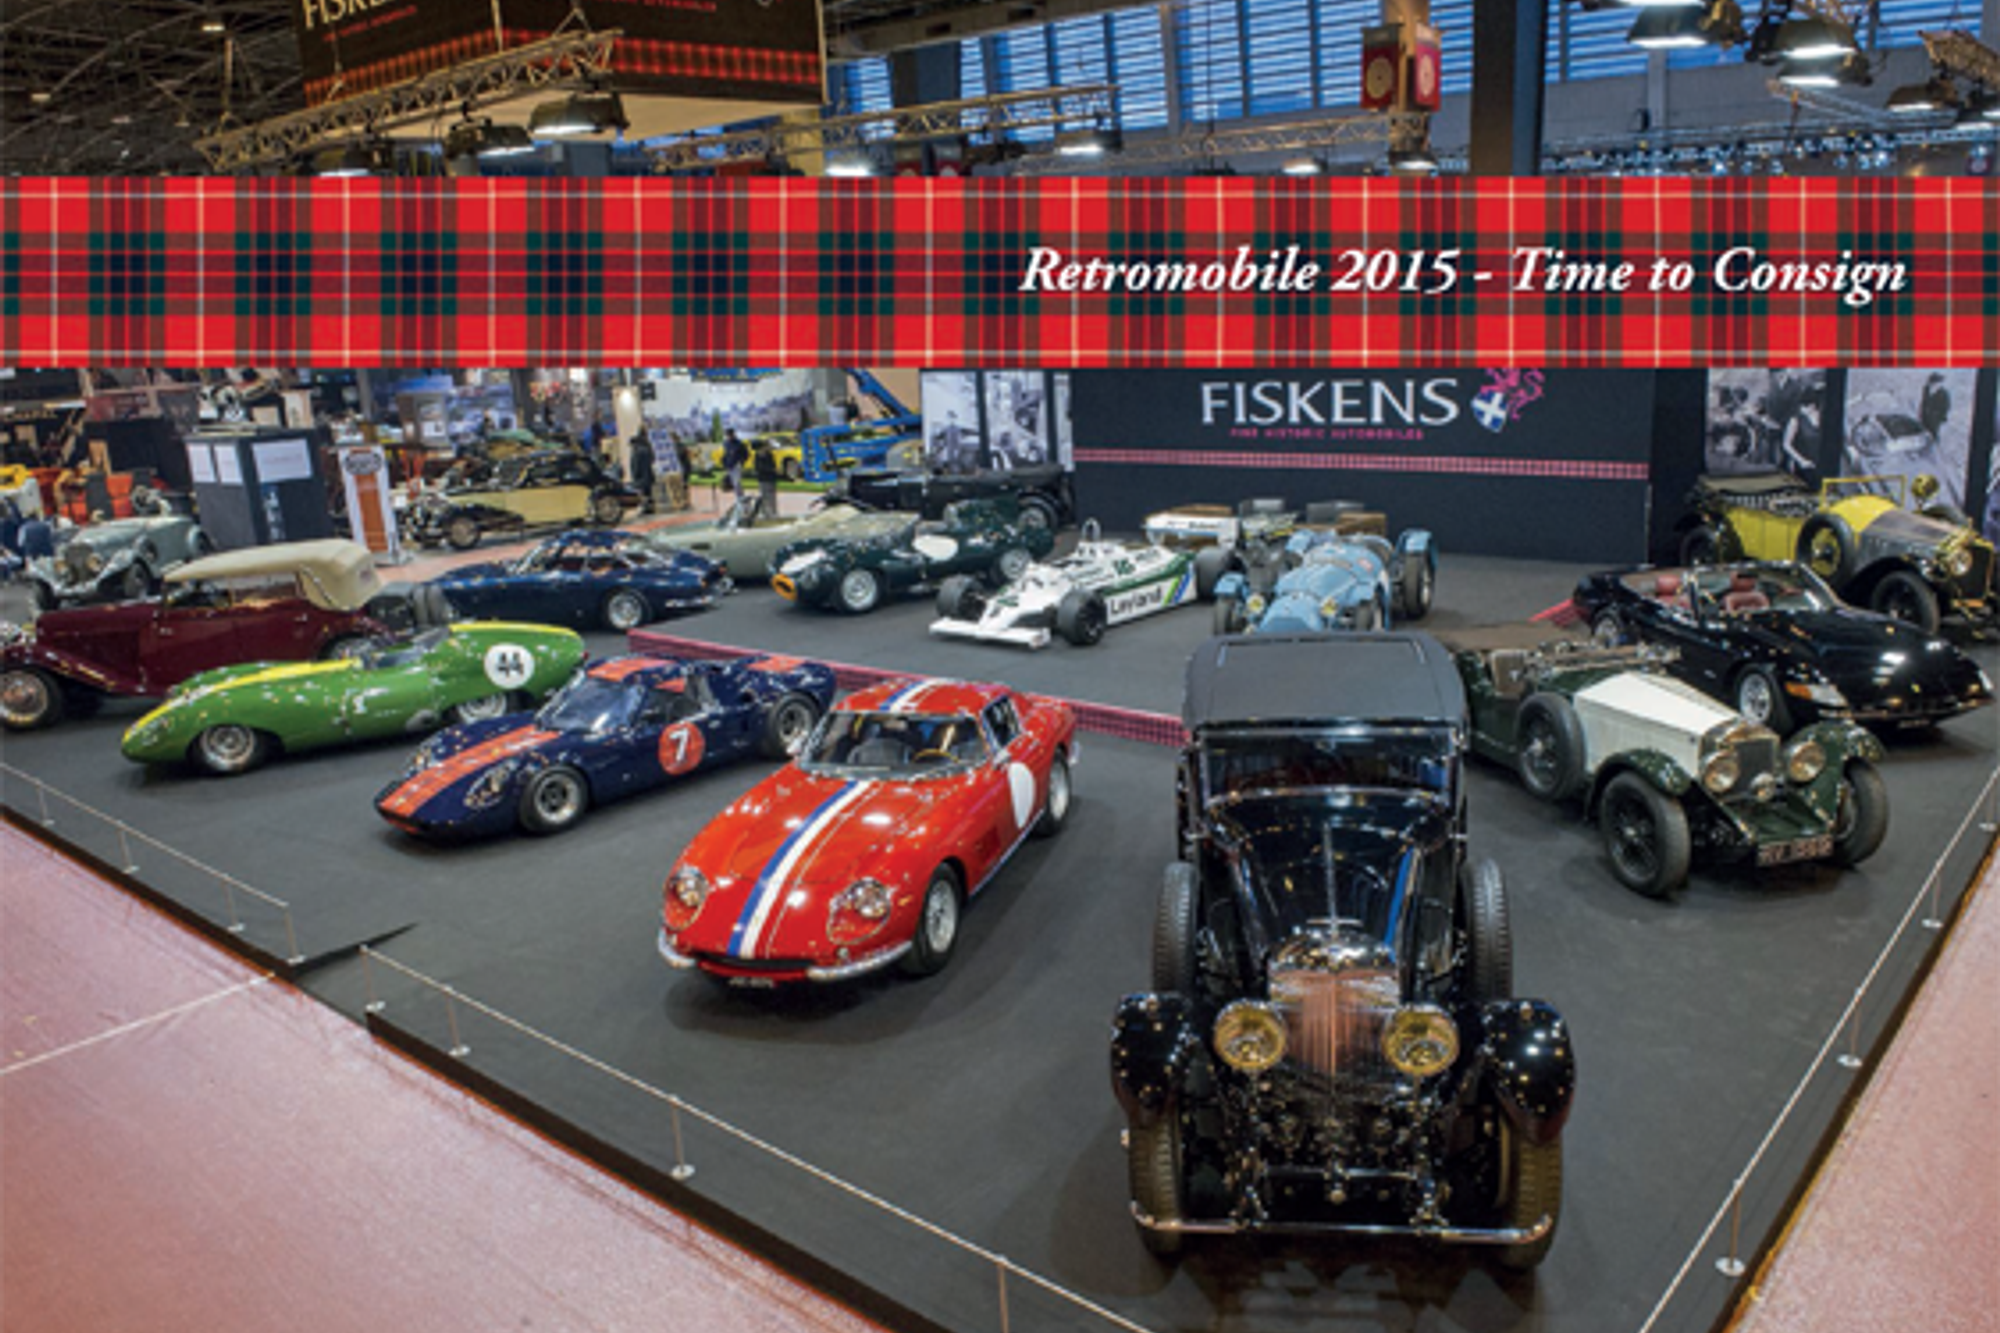 Retromobile 2015 - Time to Consign